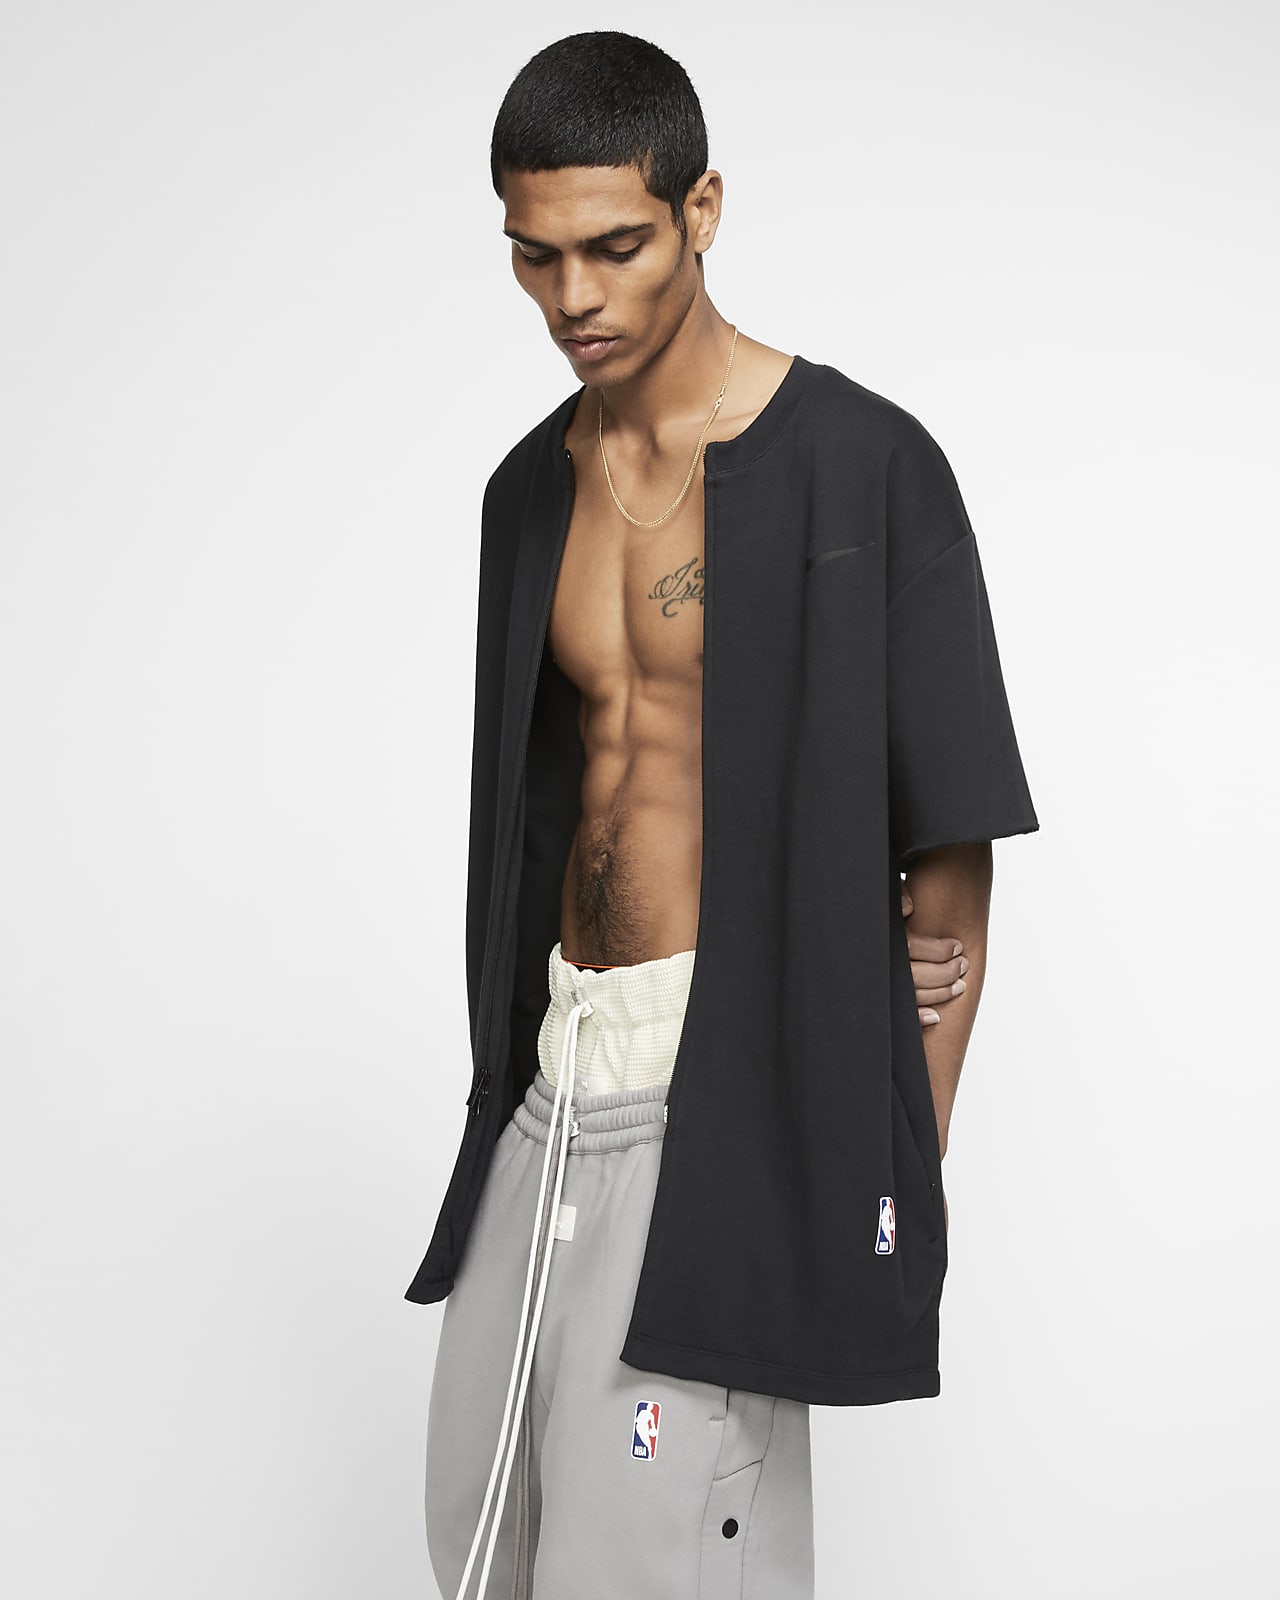 fear of god nike warm up top